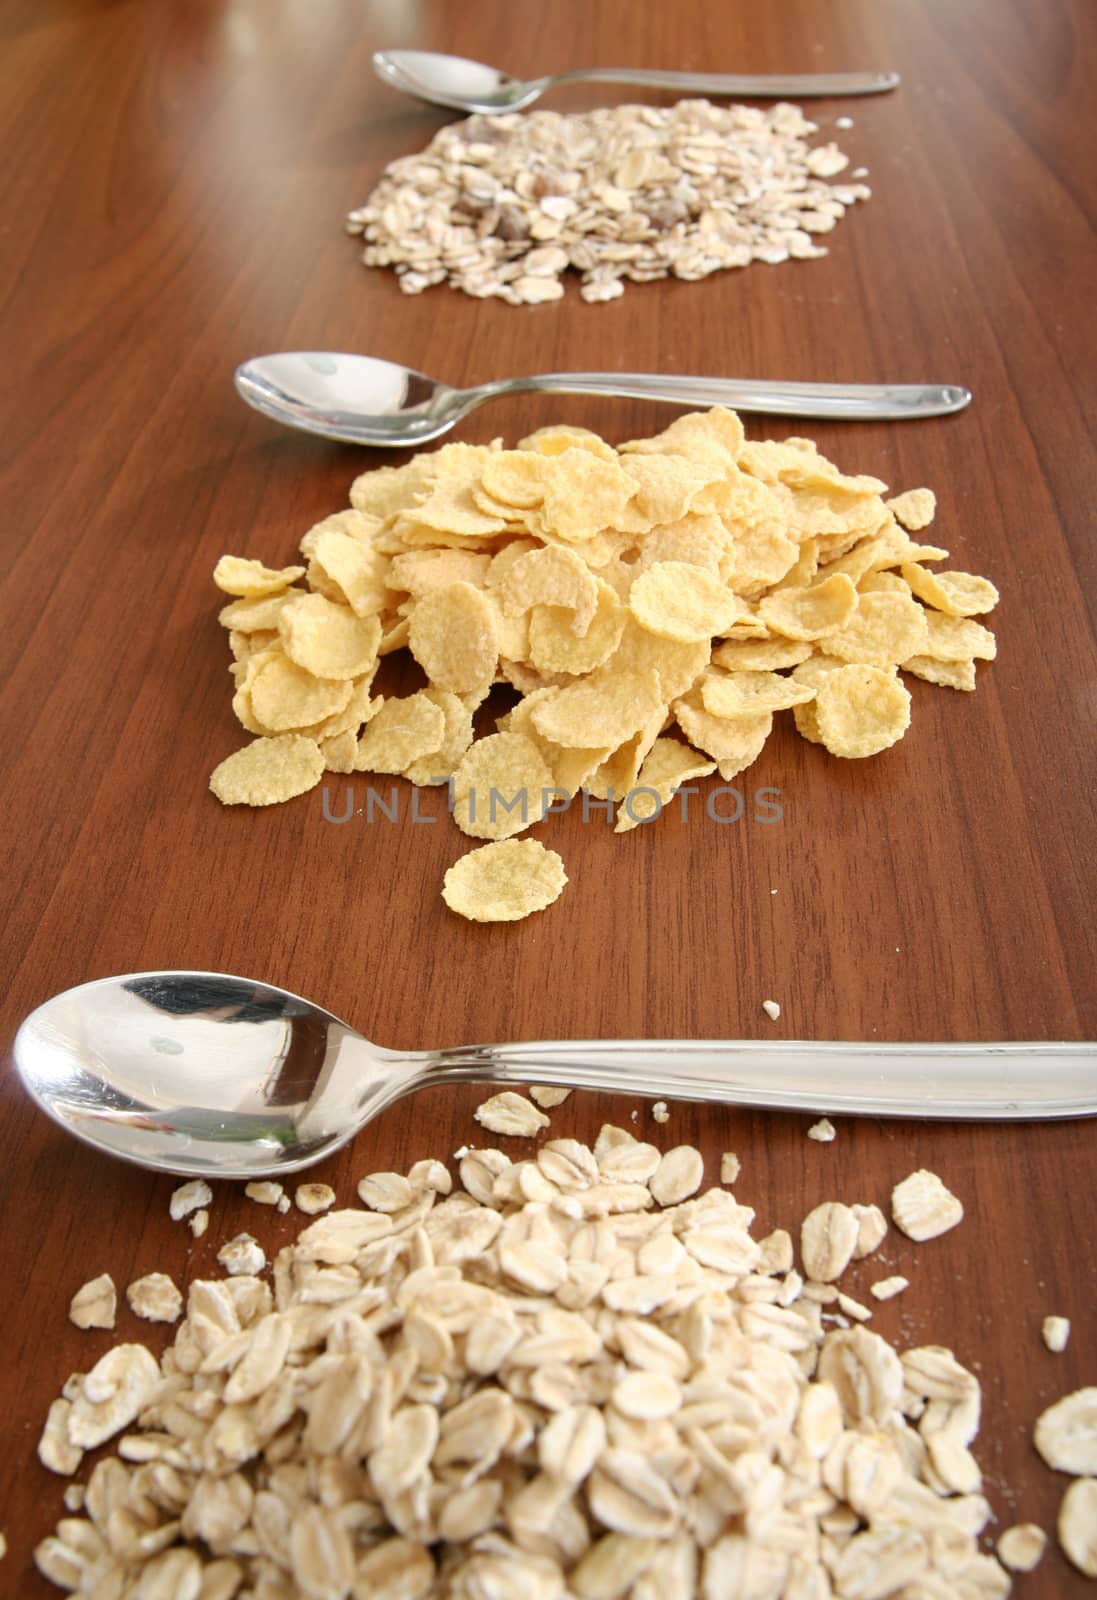 Different kinds of breakfast cereal.